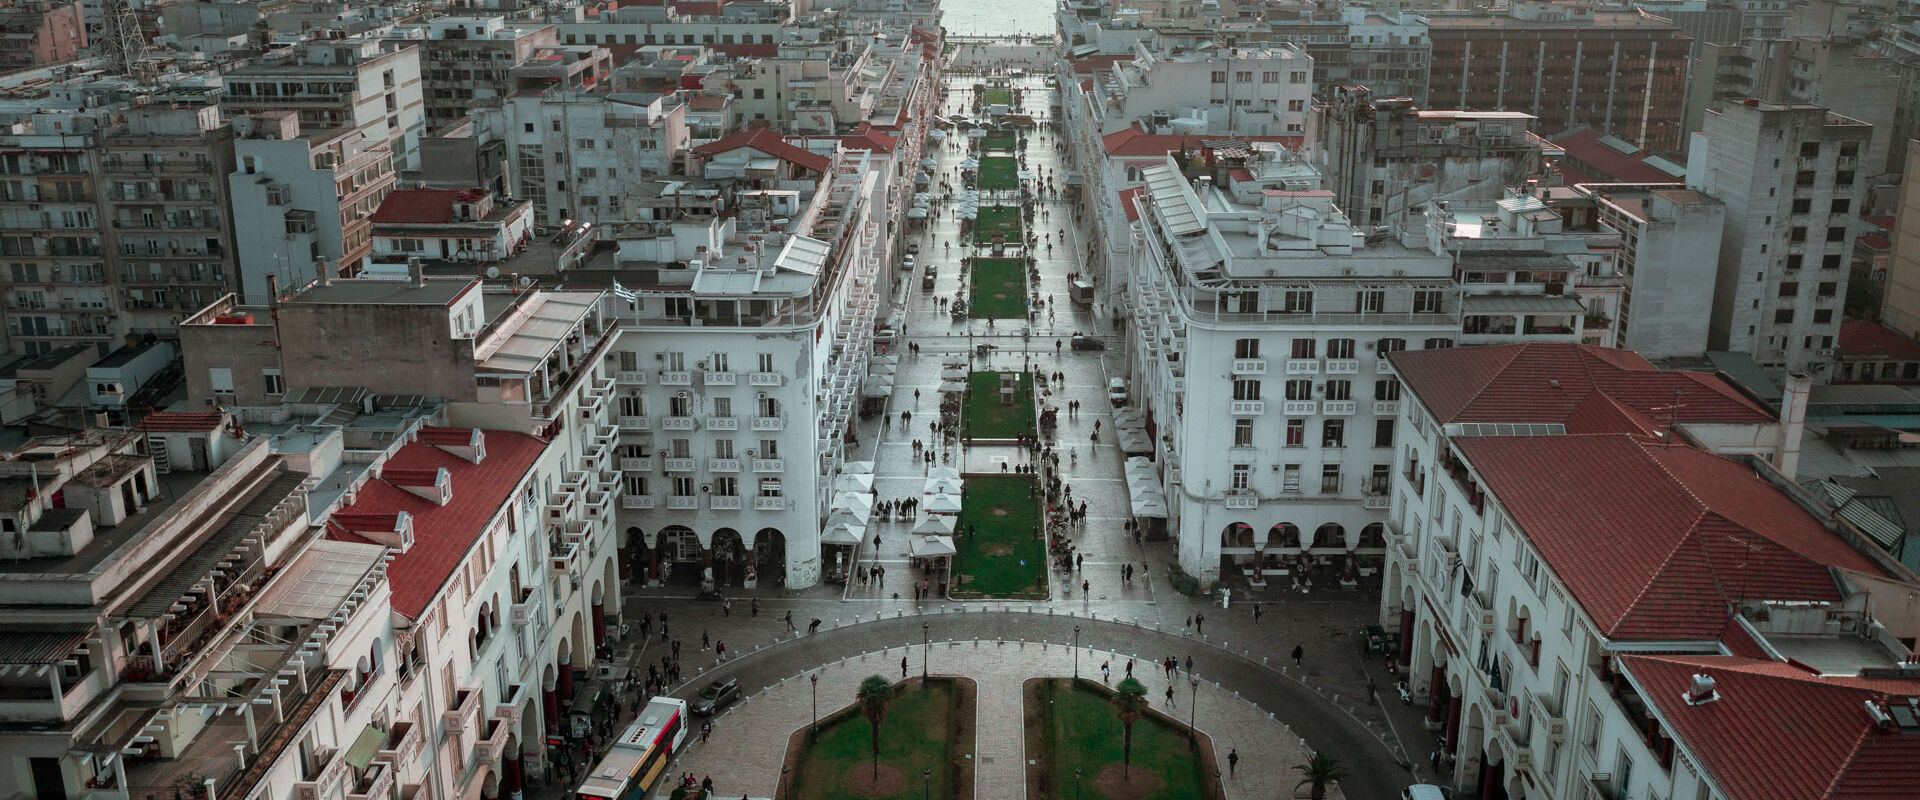 Aristotelous square from above